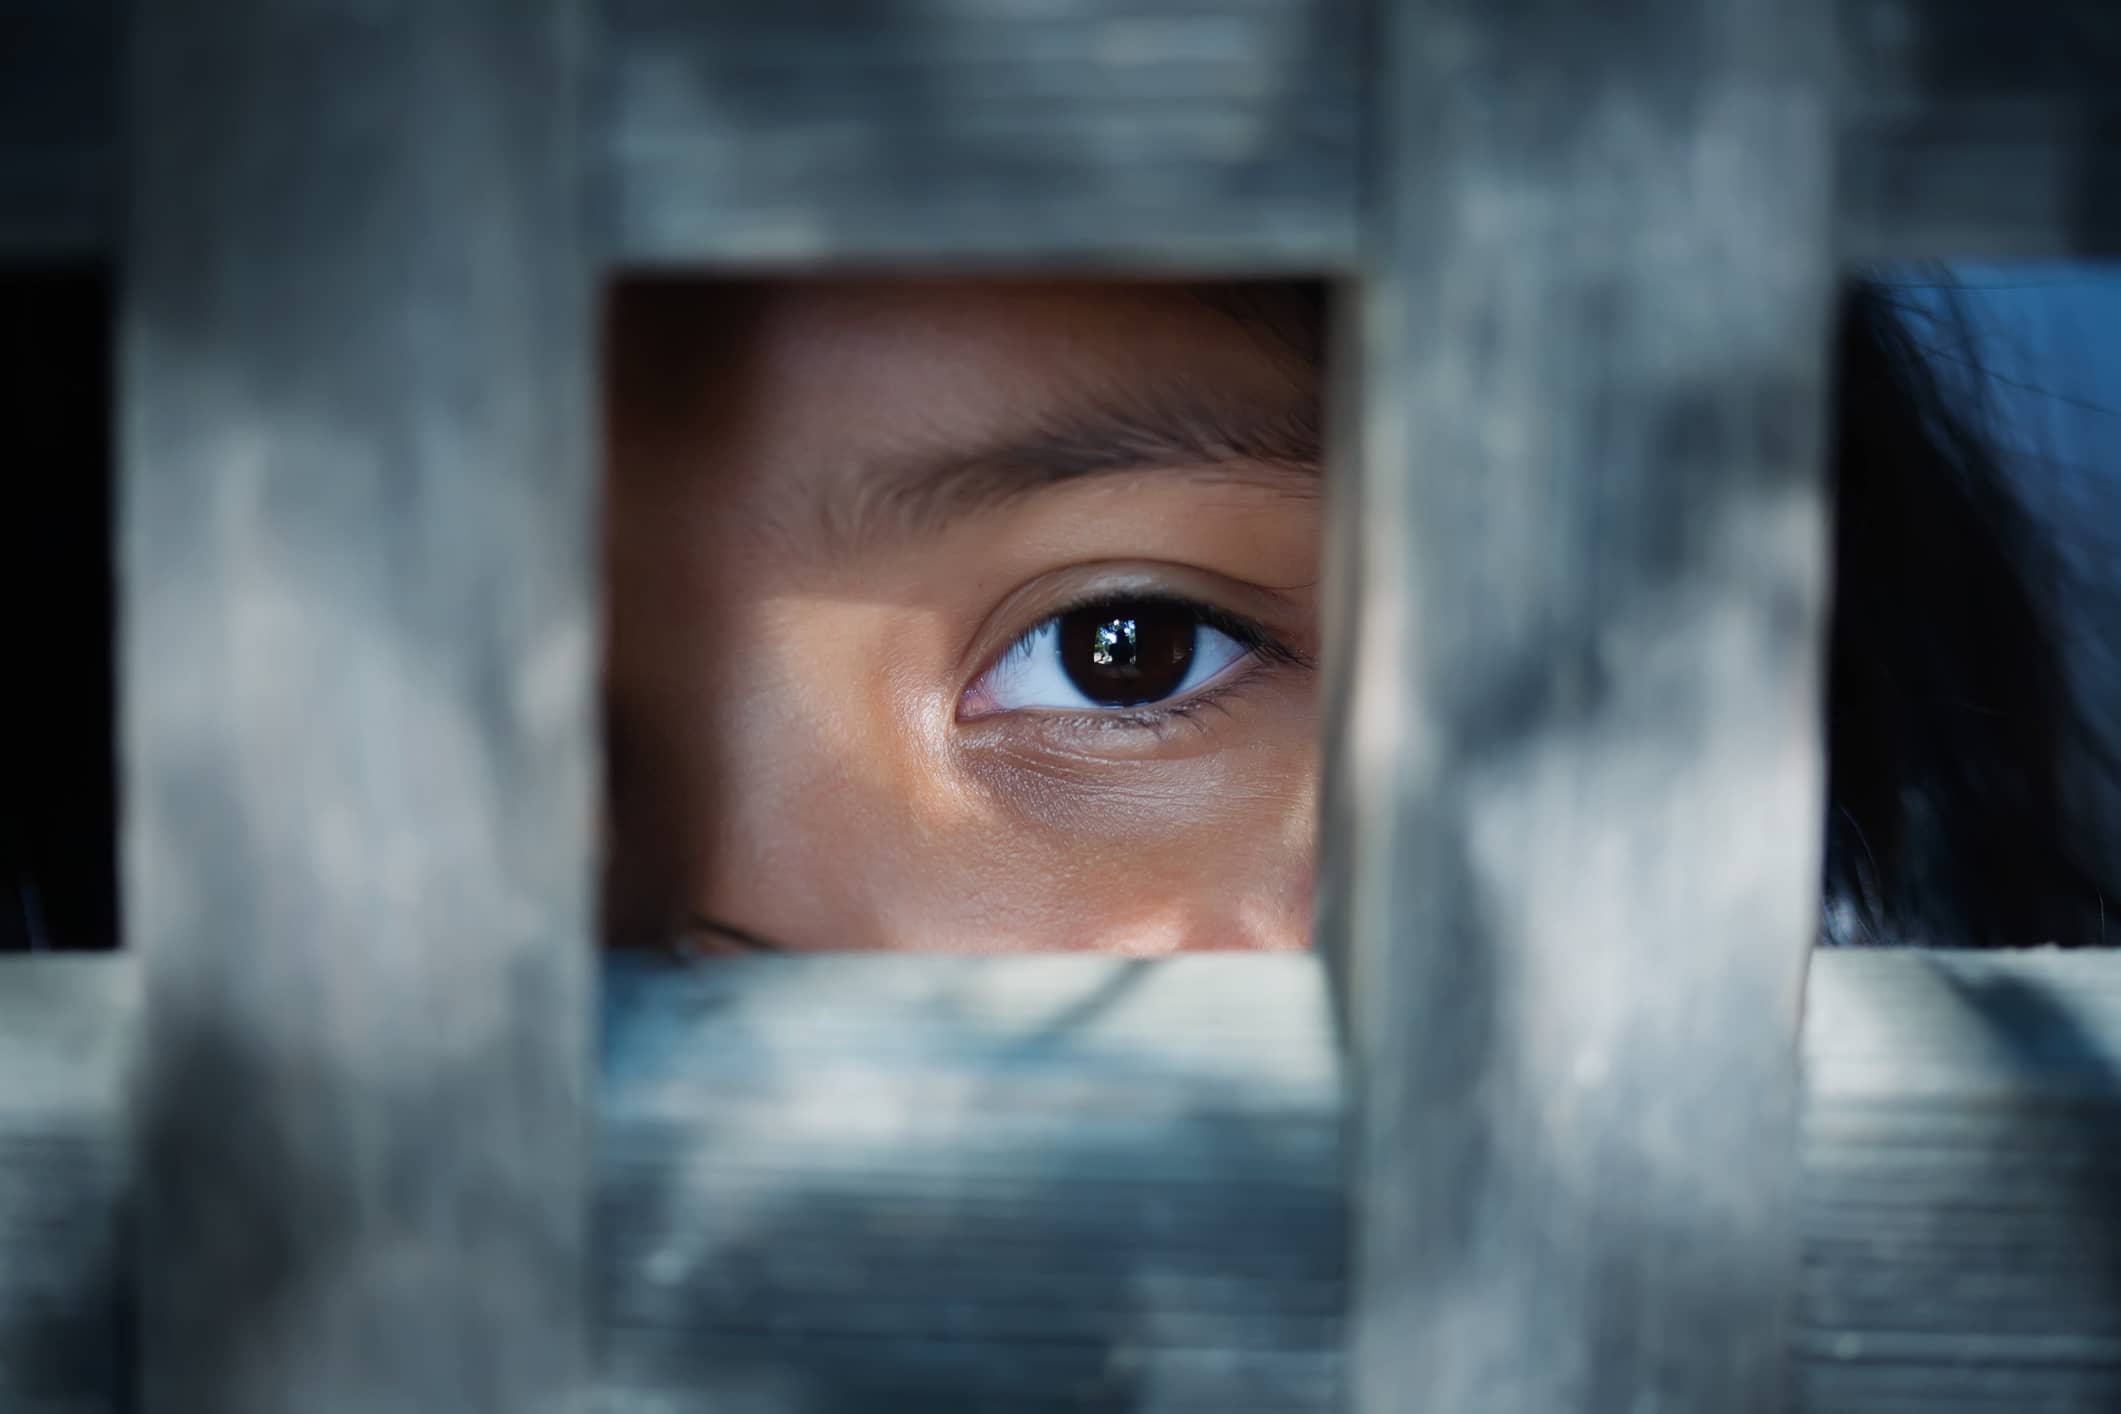 young person looking through grate, close up on eye